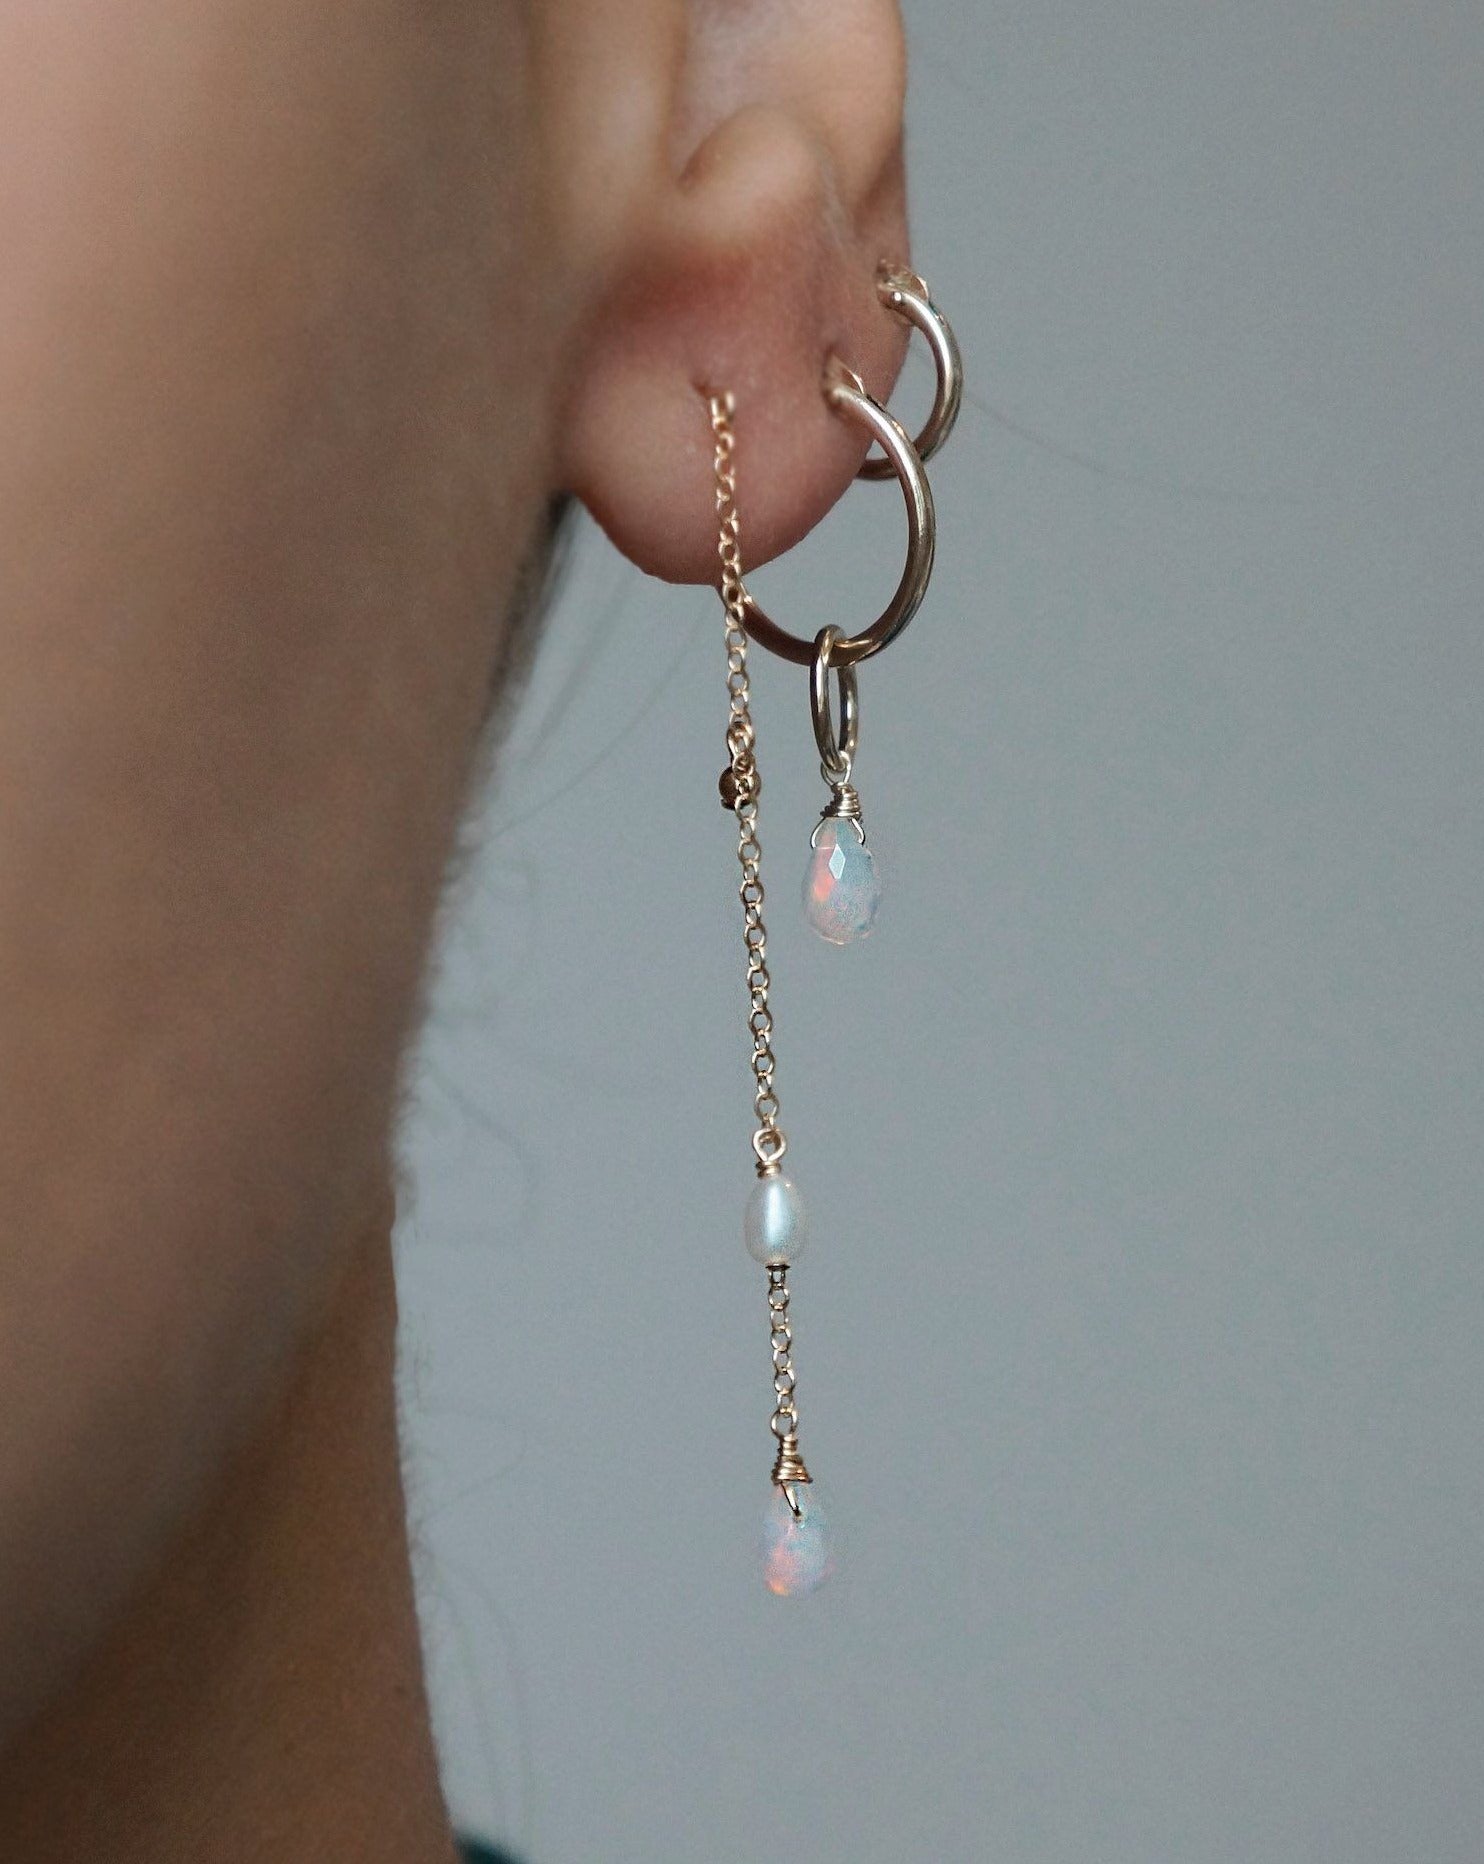 Olivia Earrings by KOZAKH. 15mm snap closure hoop earrings in 14K Gold Filled, featuring a 5mm to 7mm Ethiopian Opal faceted droplet.